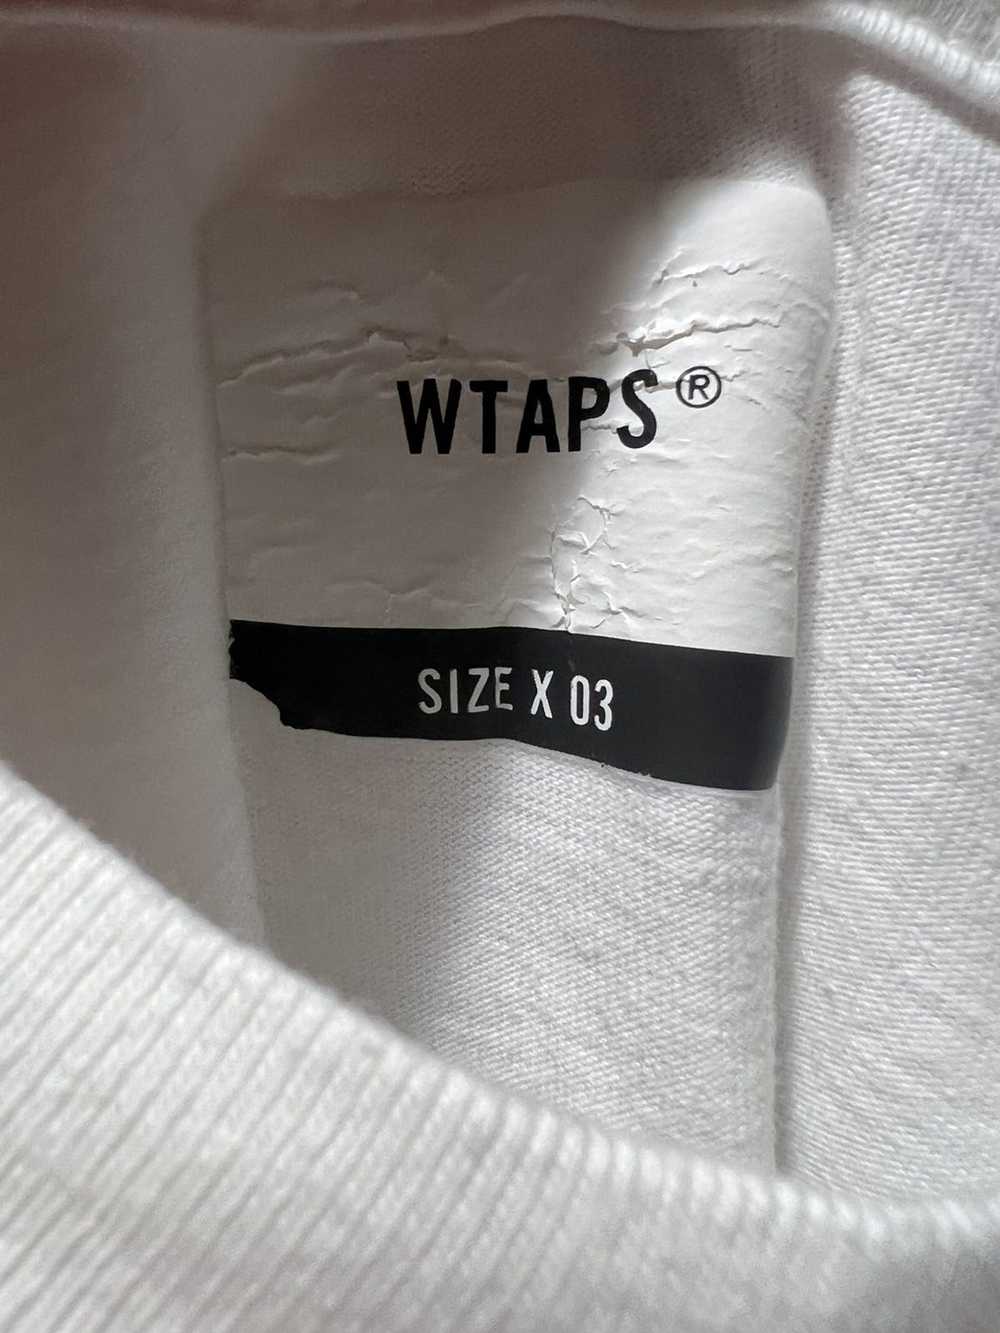 Wtaps Wtaps hammer and sickle repeat print tee - image 3